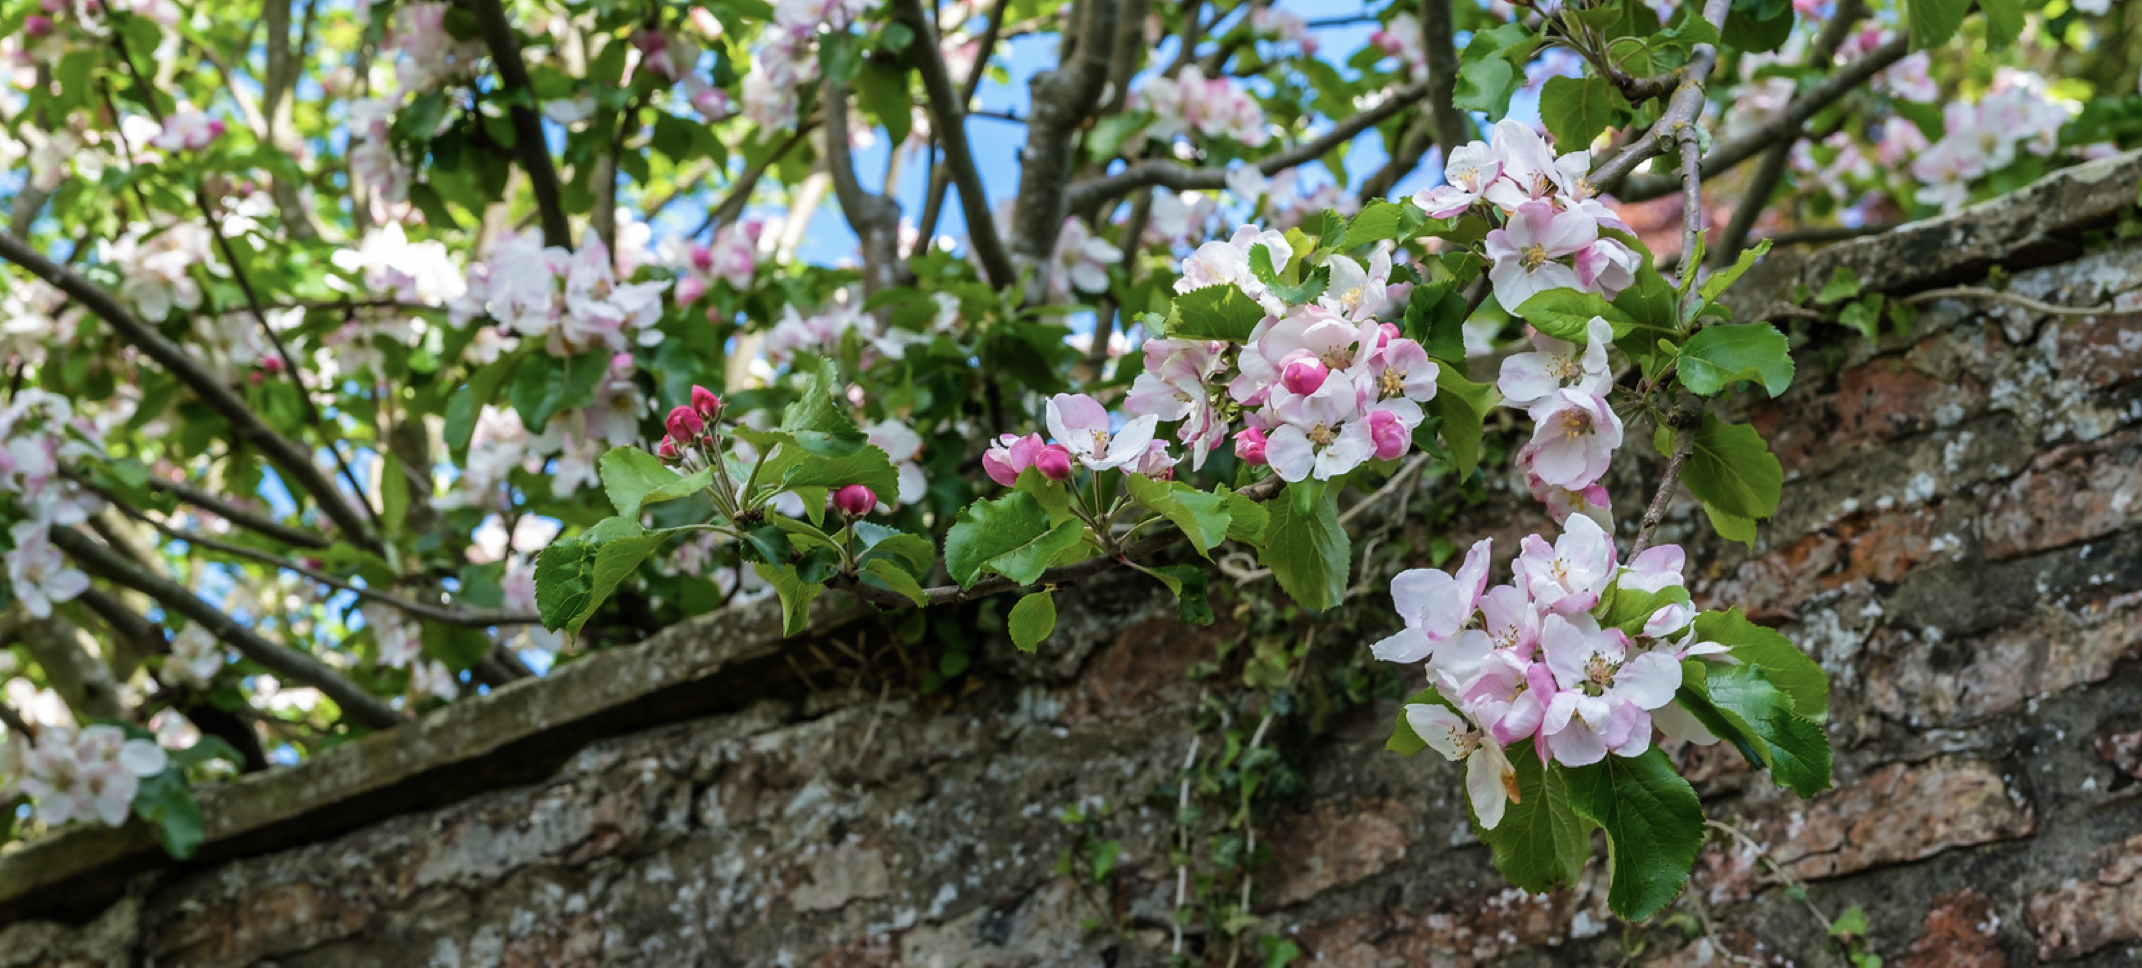 Blossoming apple tree in a walled garden at Sand Hutton Hall, Yorkshire, May 2, 2020 (Photo by Alan Harris) Creative Commons license via Flickr